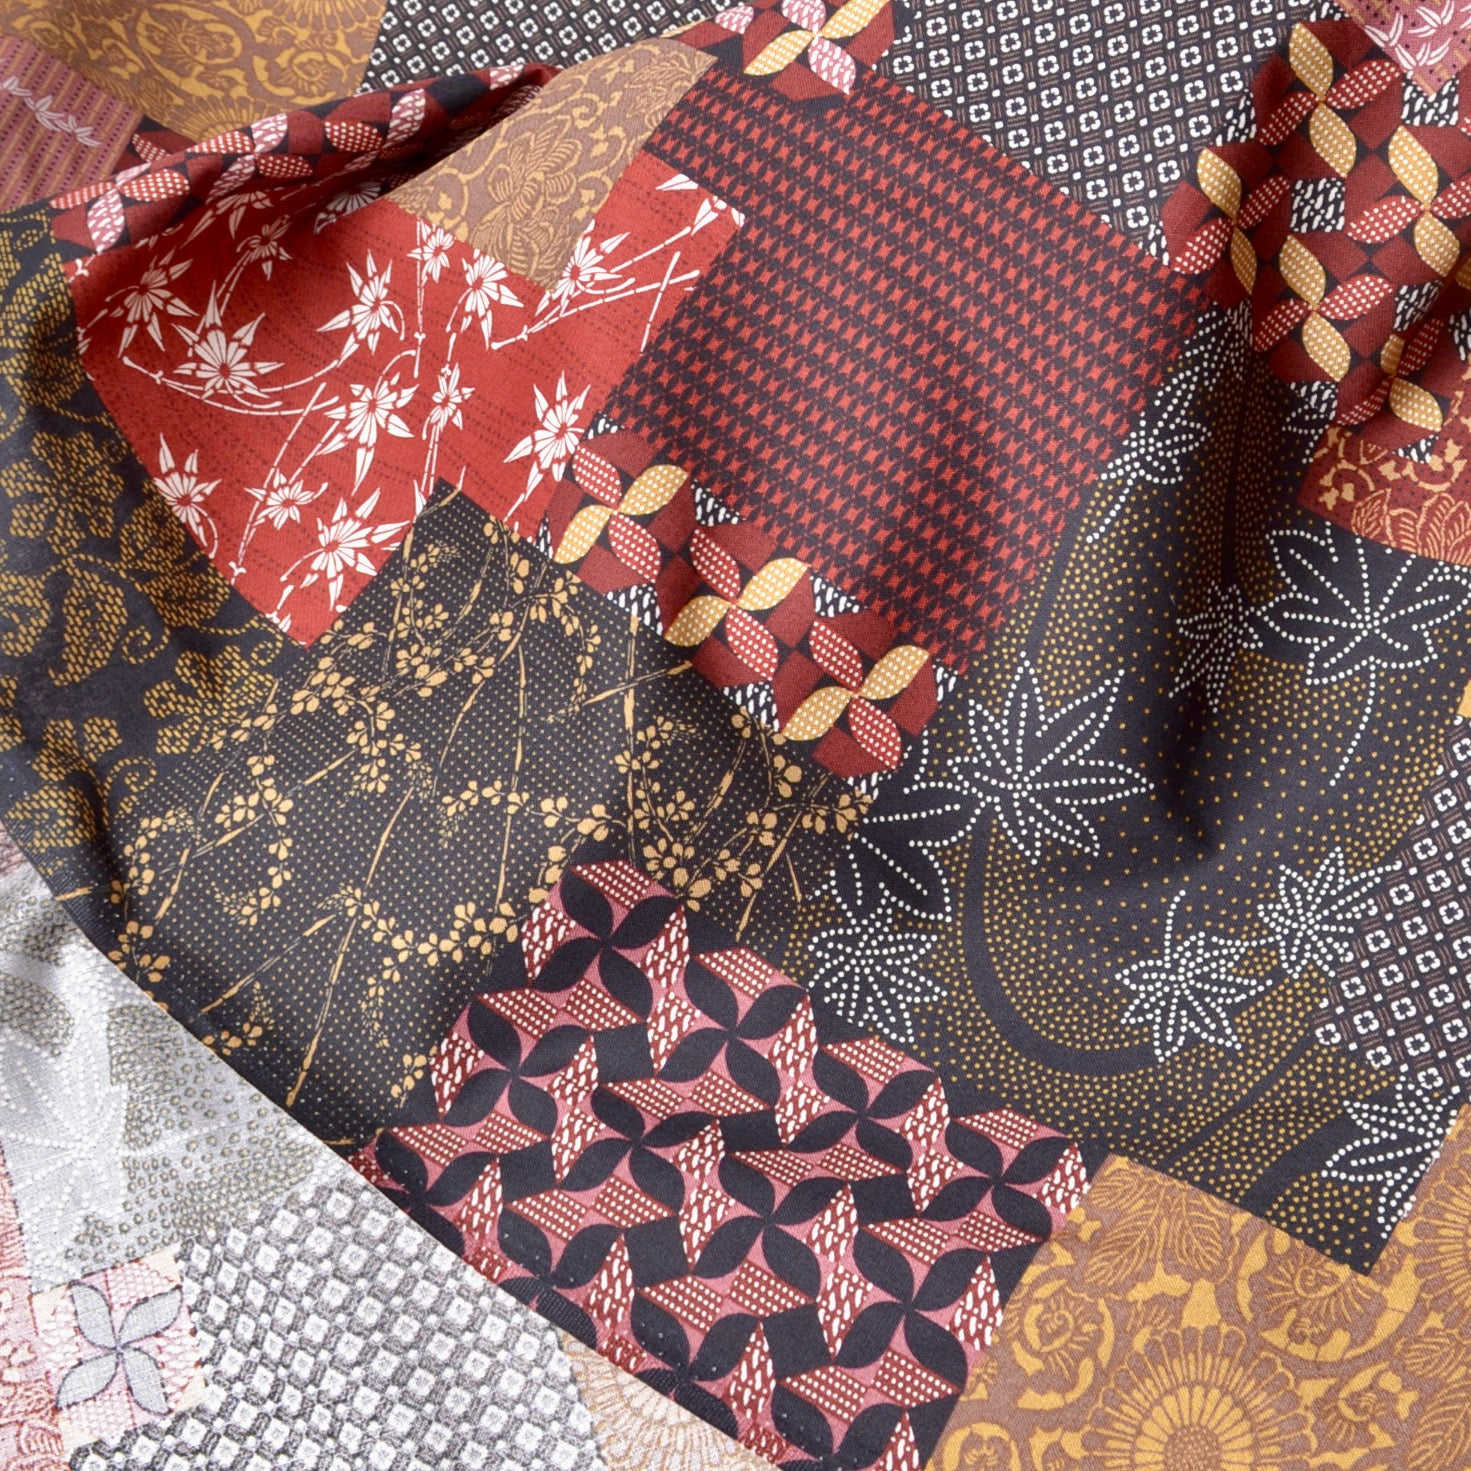 Japanese Print Fabric, Red Patchwork - A Threaded Needle